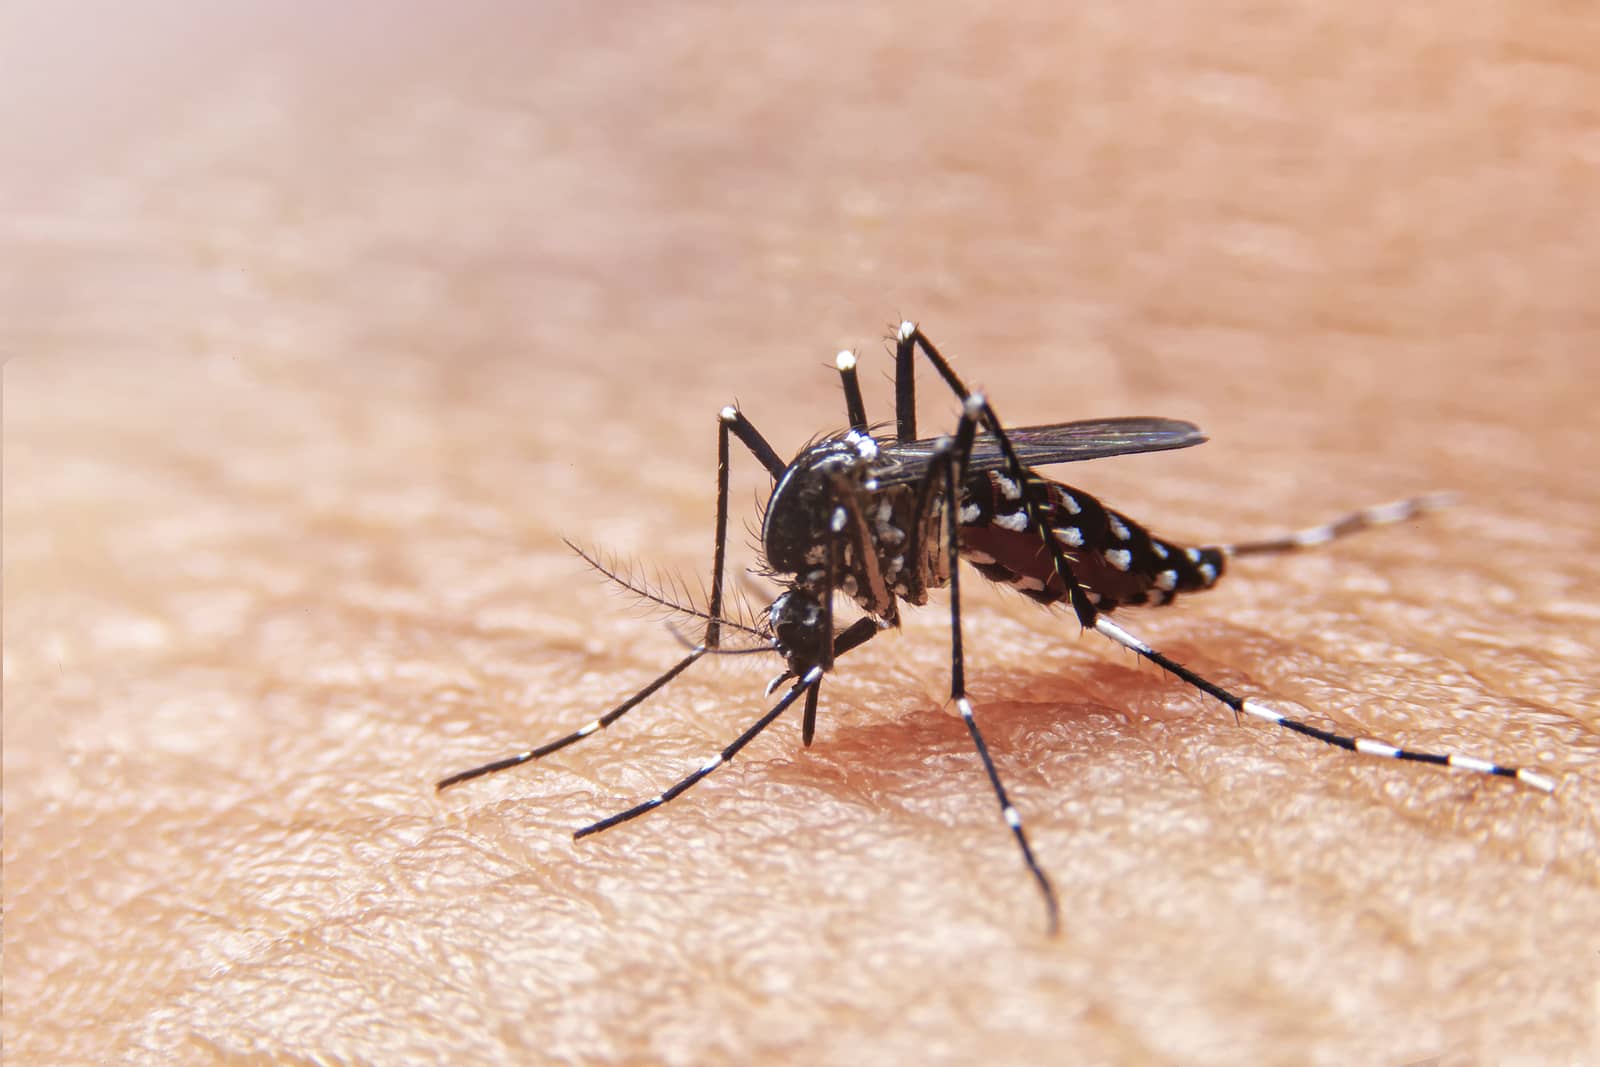 striped-mosquitoes-are-eating-blood-on-human-skin-mosquitoes-ar